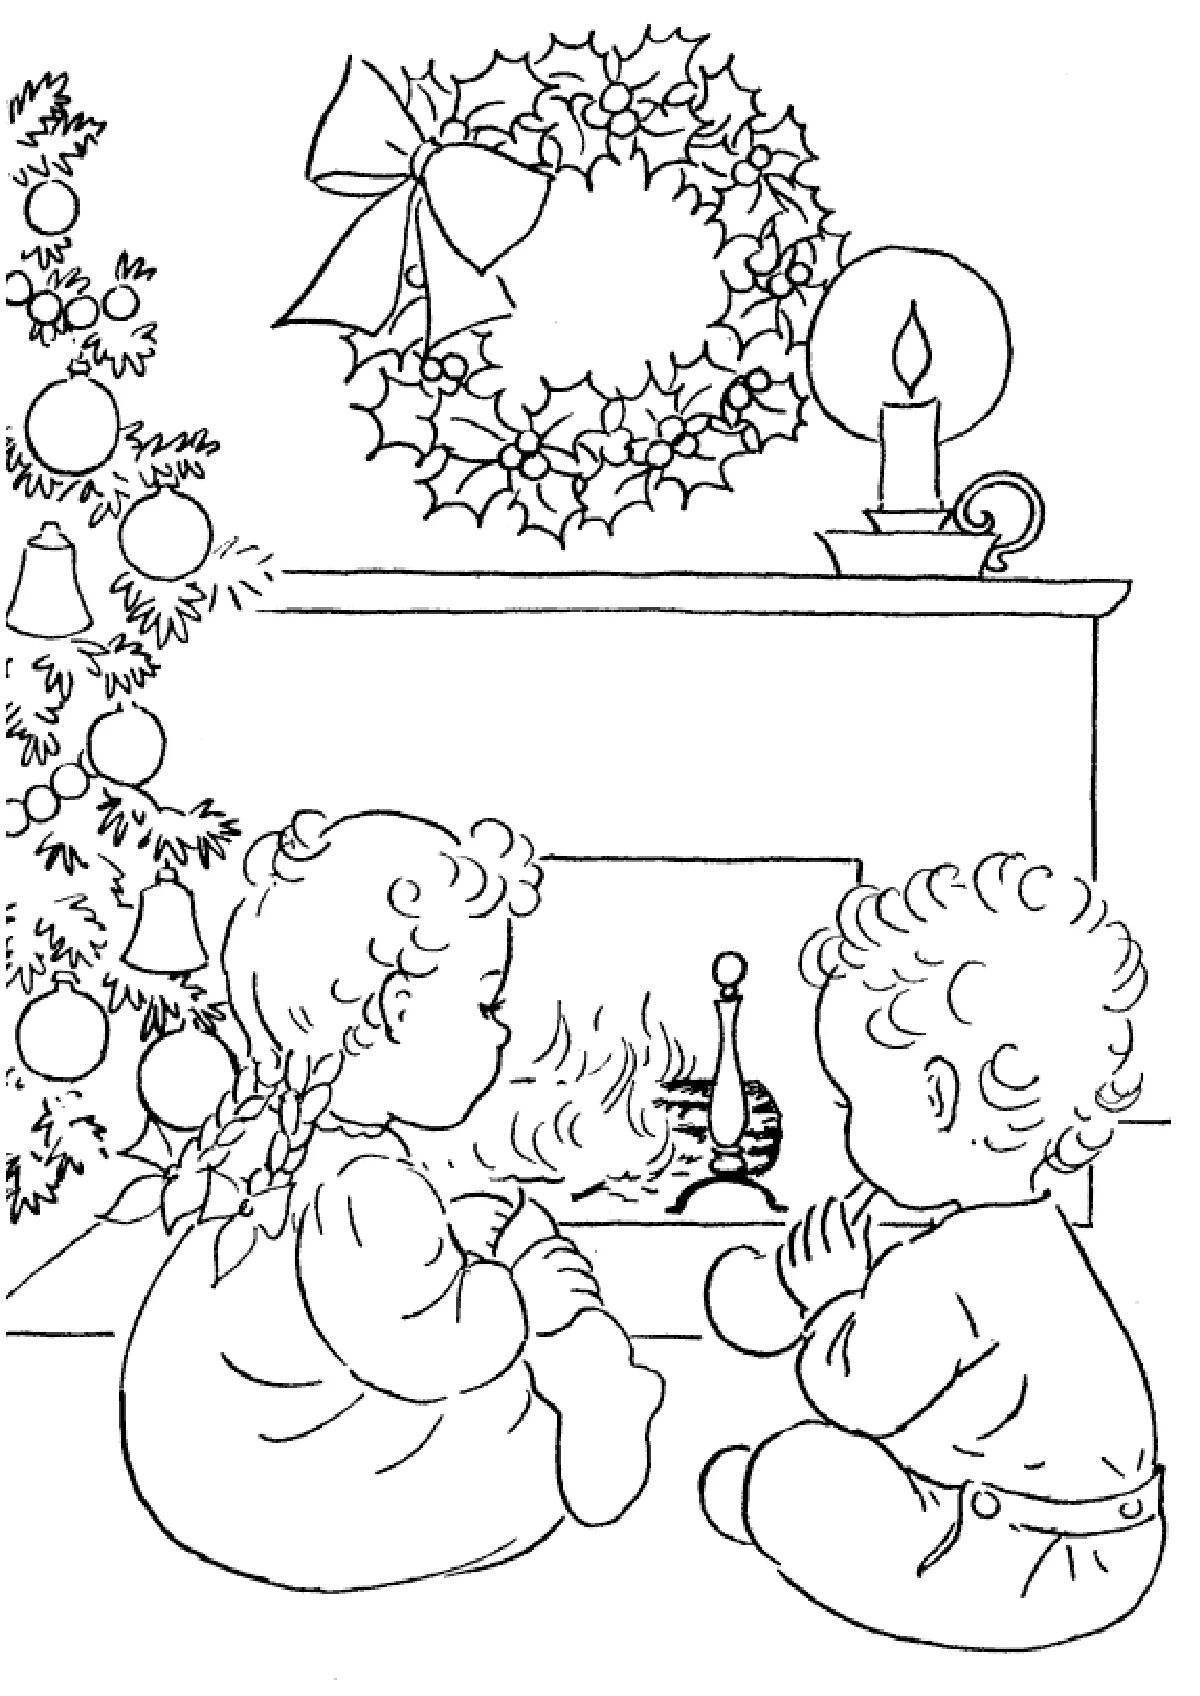 Amazing Christmas story coloring book